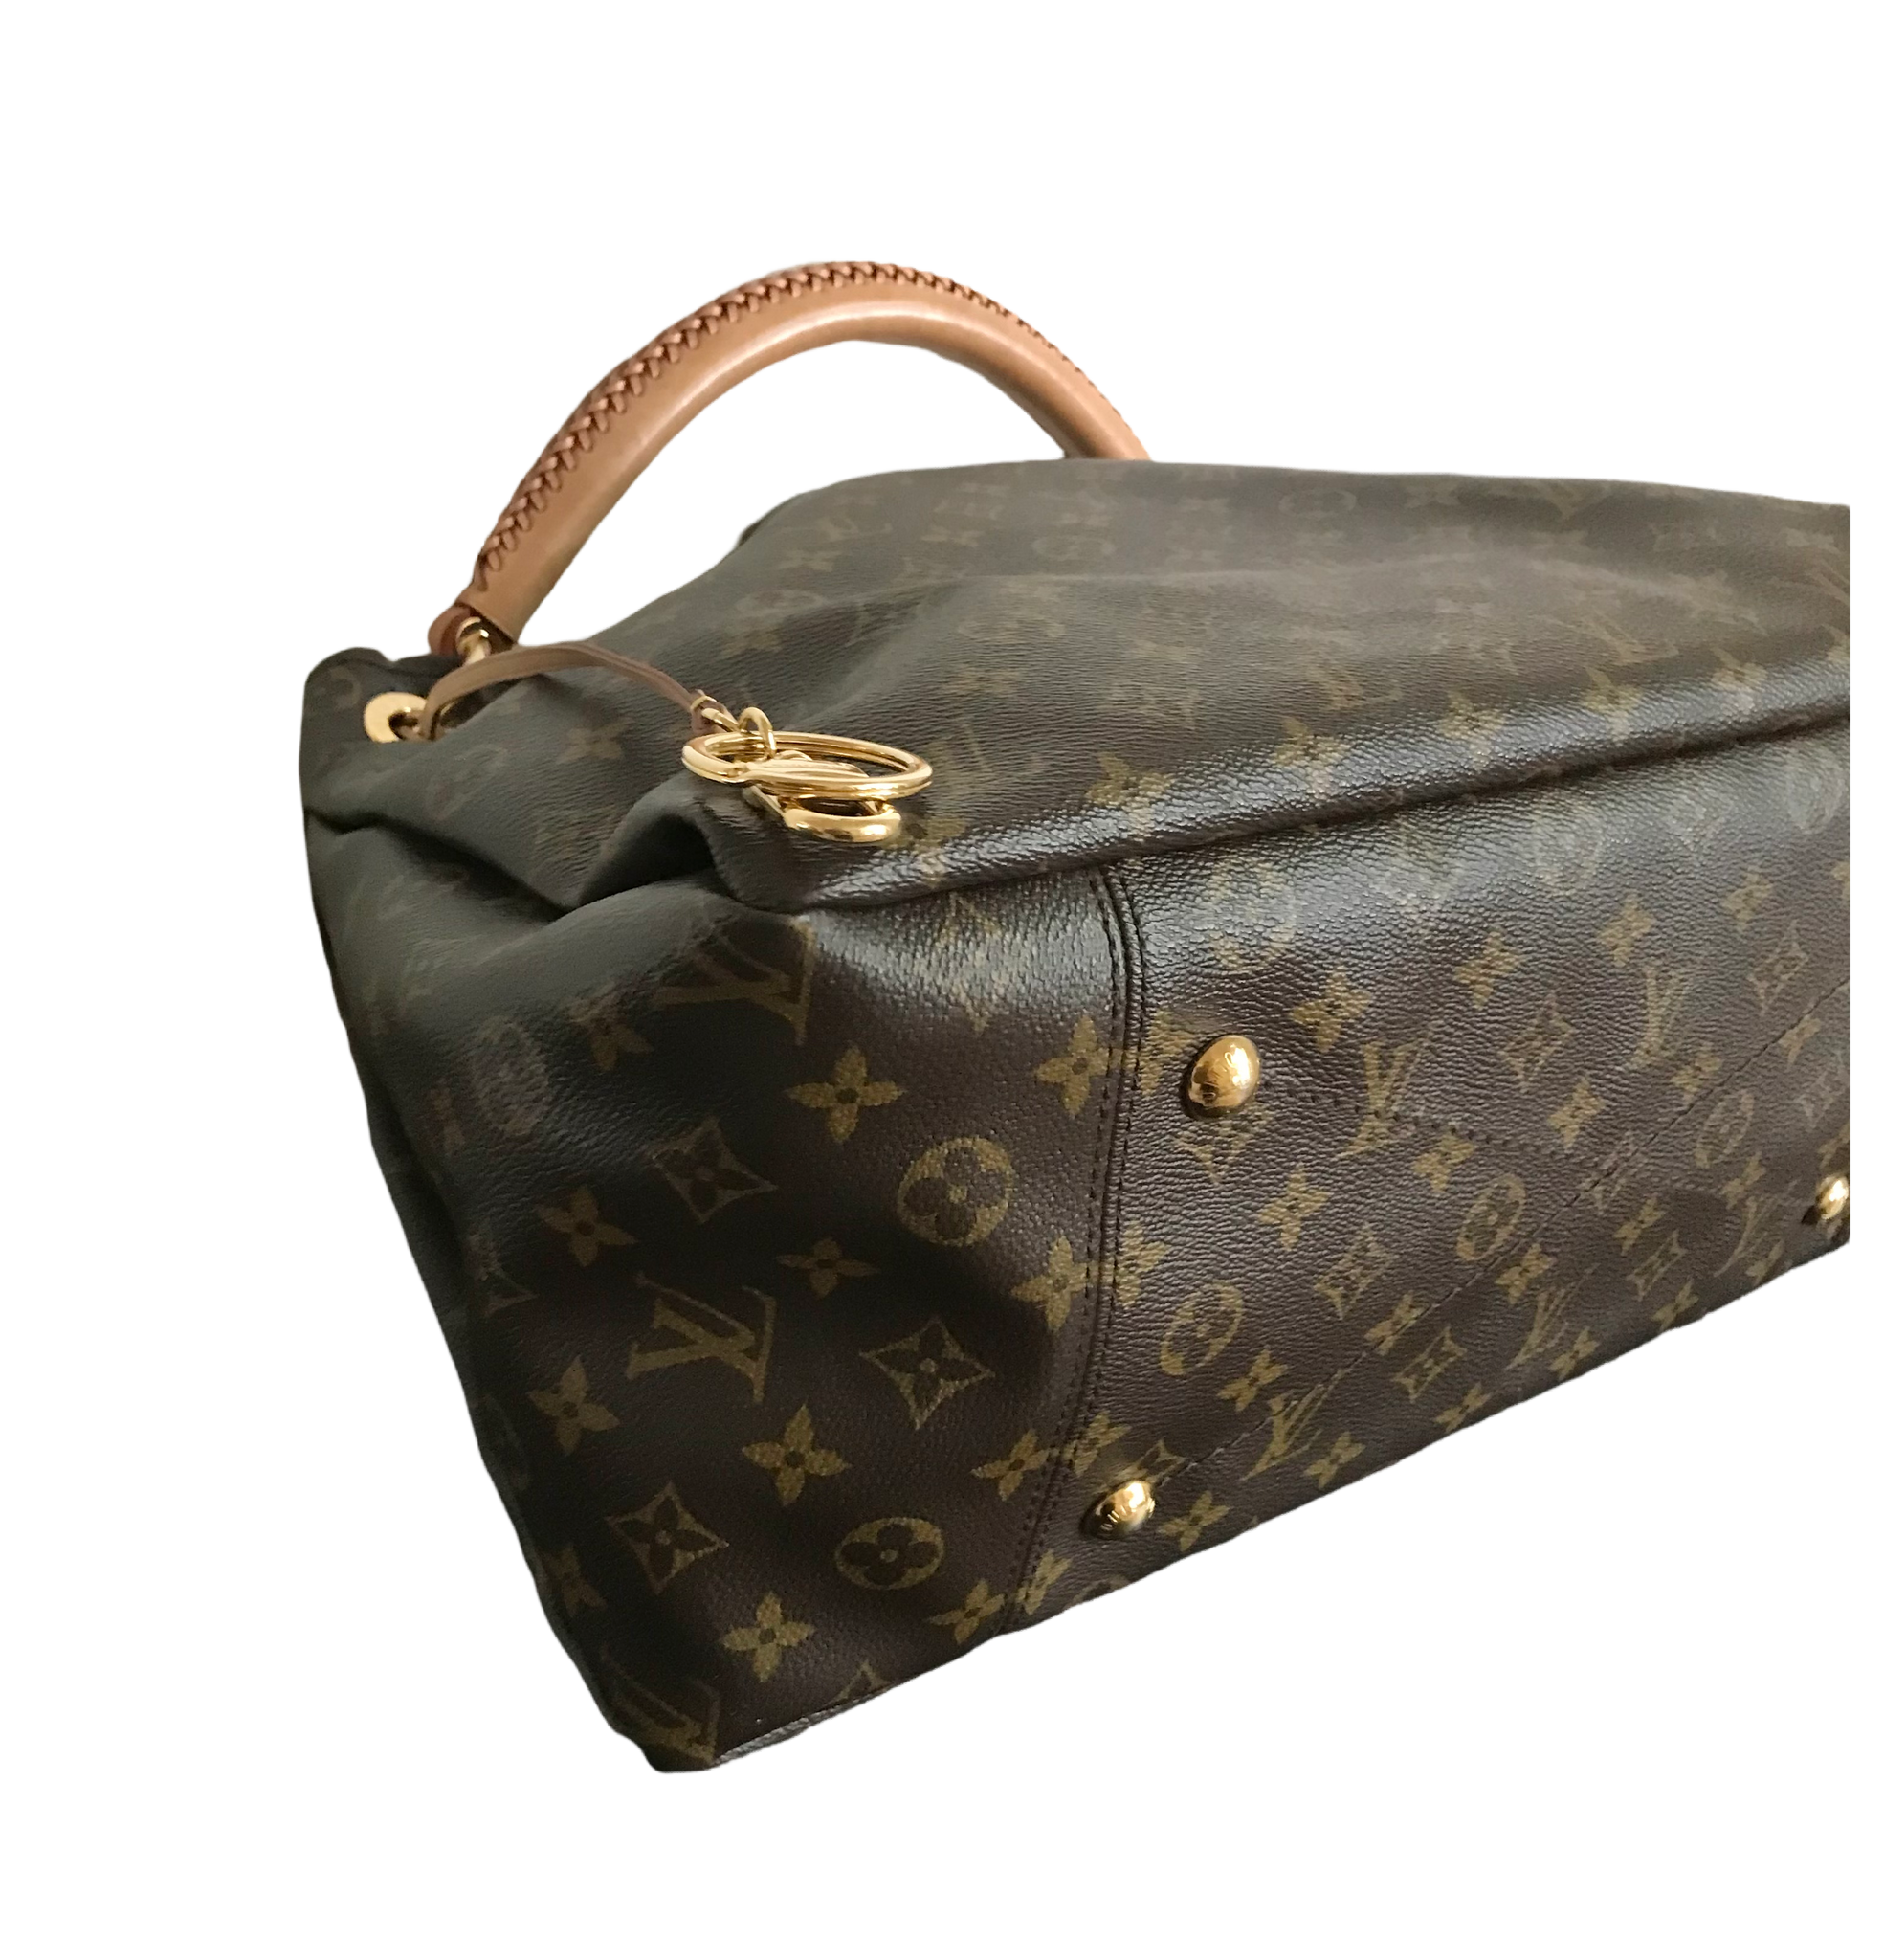 Vespucci Consignment - LOUIS VUITTON Monogram Artsy Bag Size MM Was $2495  Now $2245 Available in-store and online